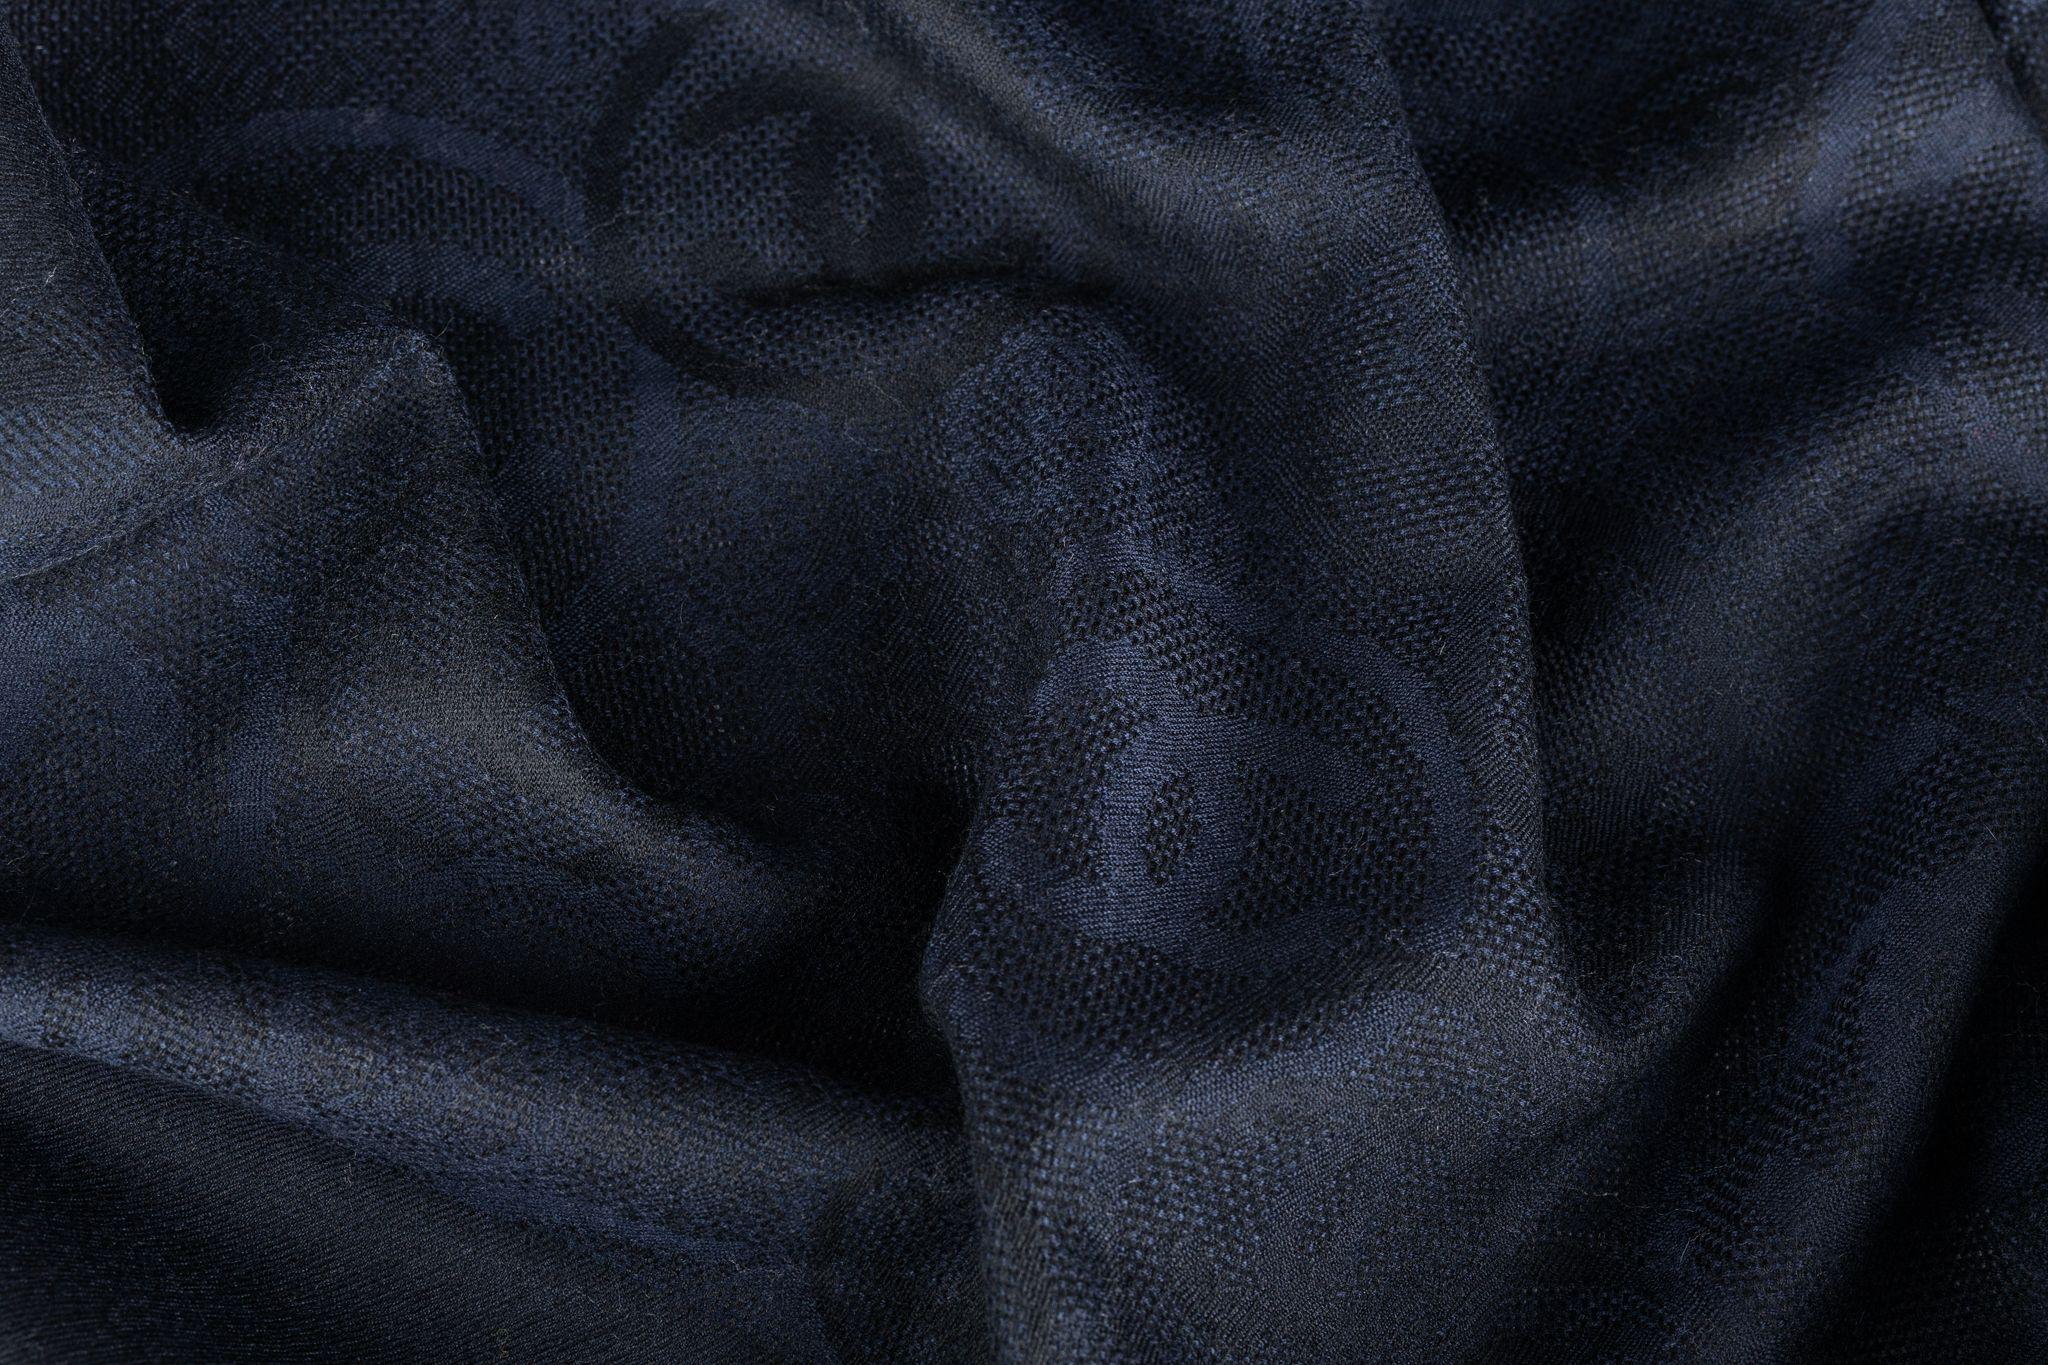 Chanel Cashmere Shawl in navy. The pattern features several CC logos all over the scarf. The item is in new condition.